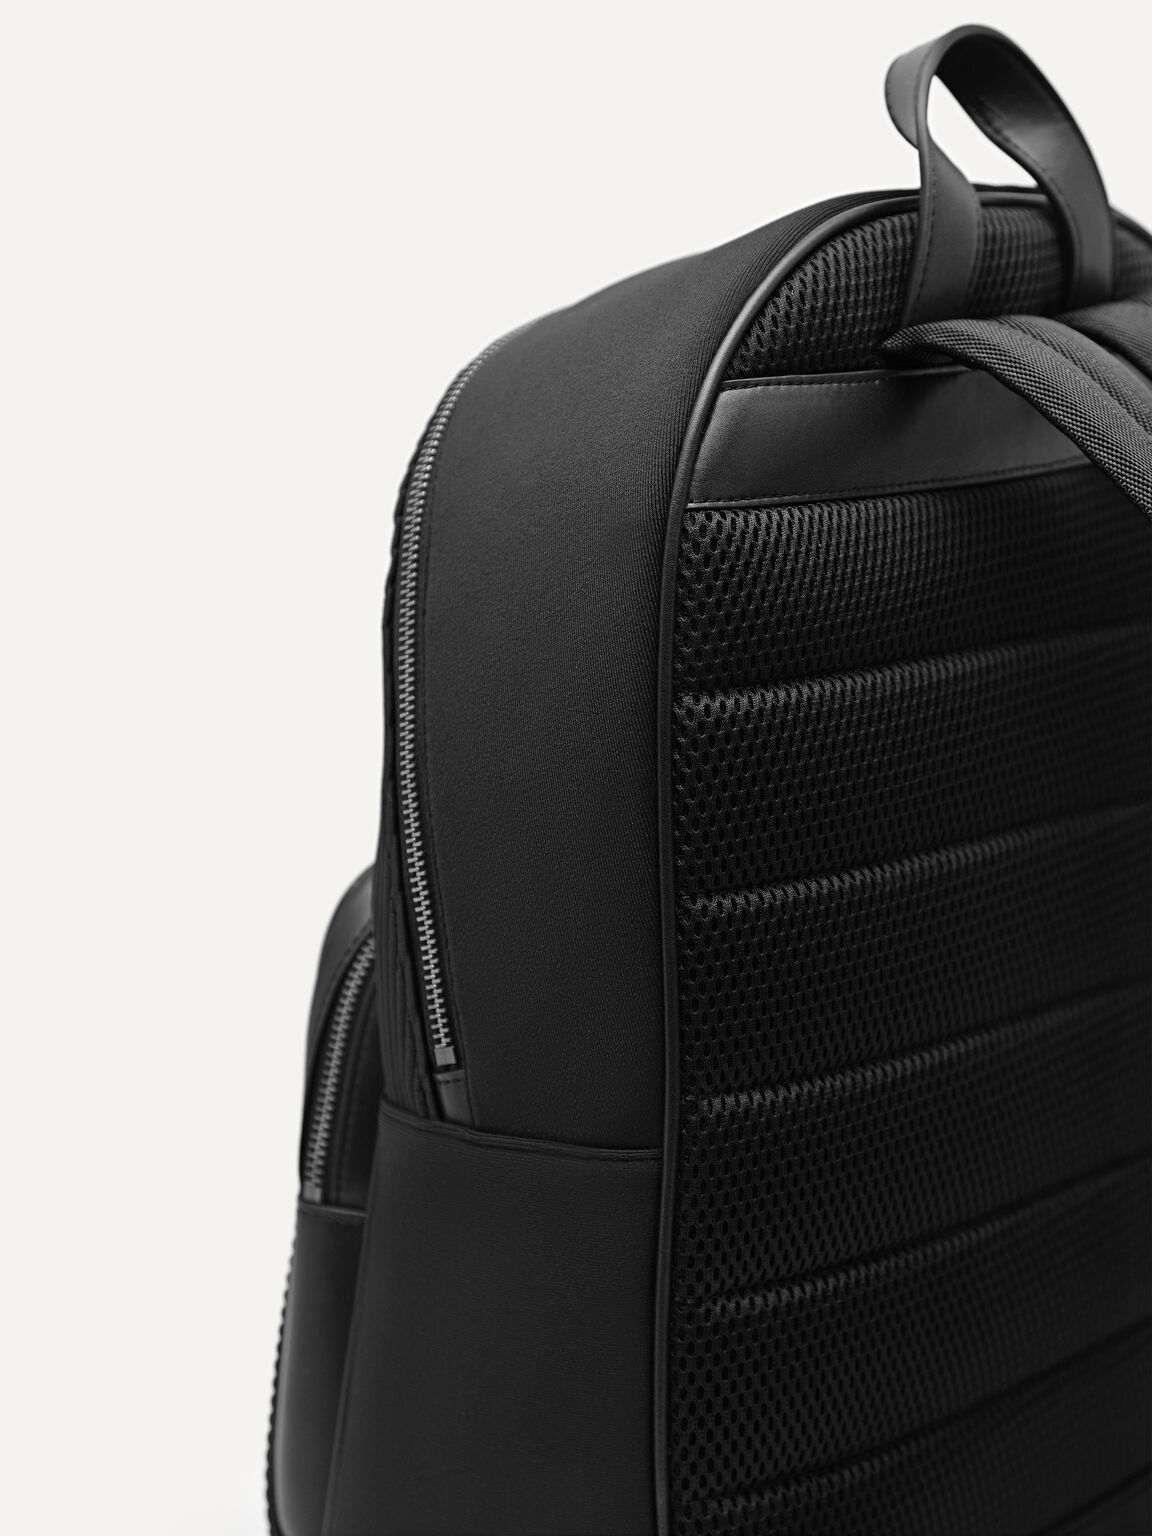 rePEDRO Pleated Backpack, Black, hi-res